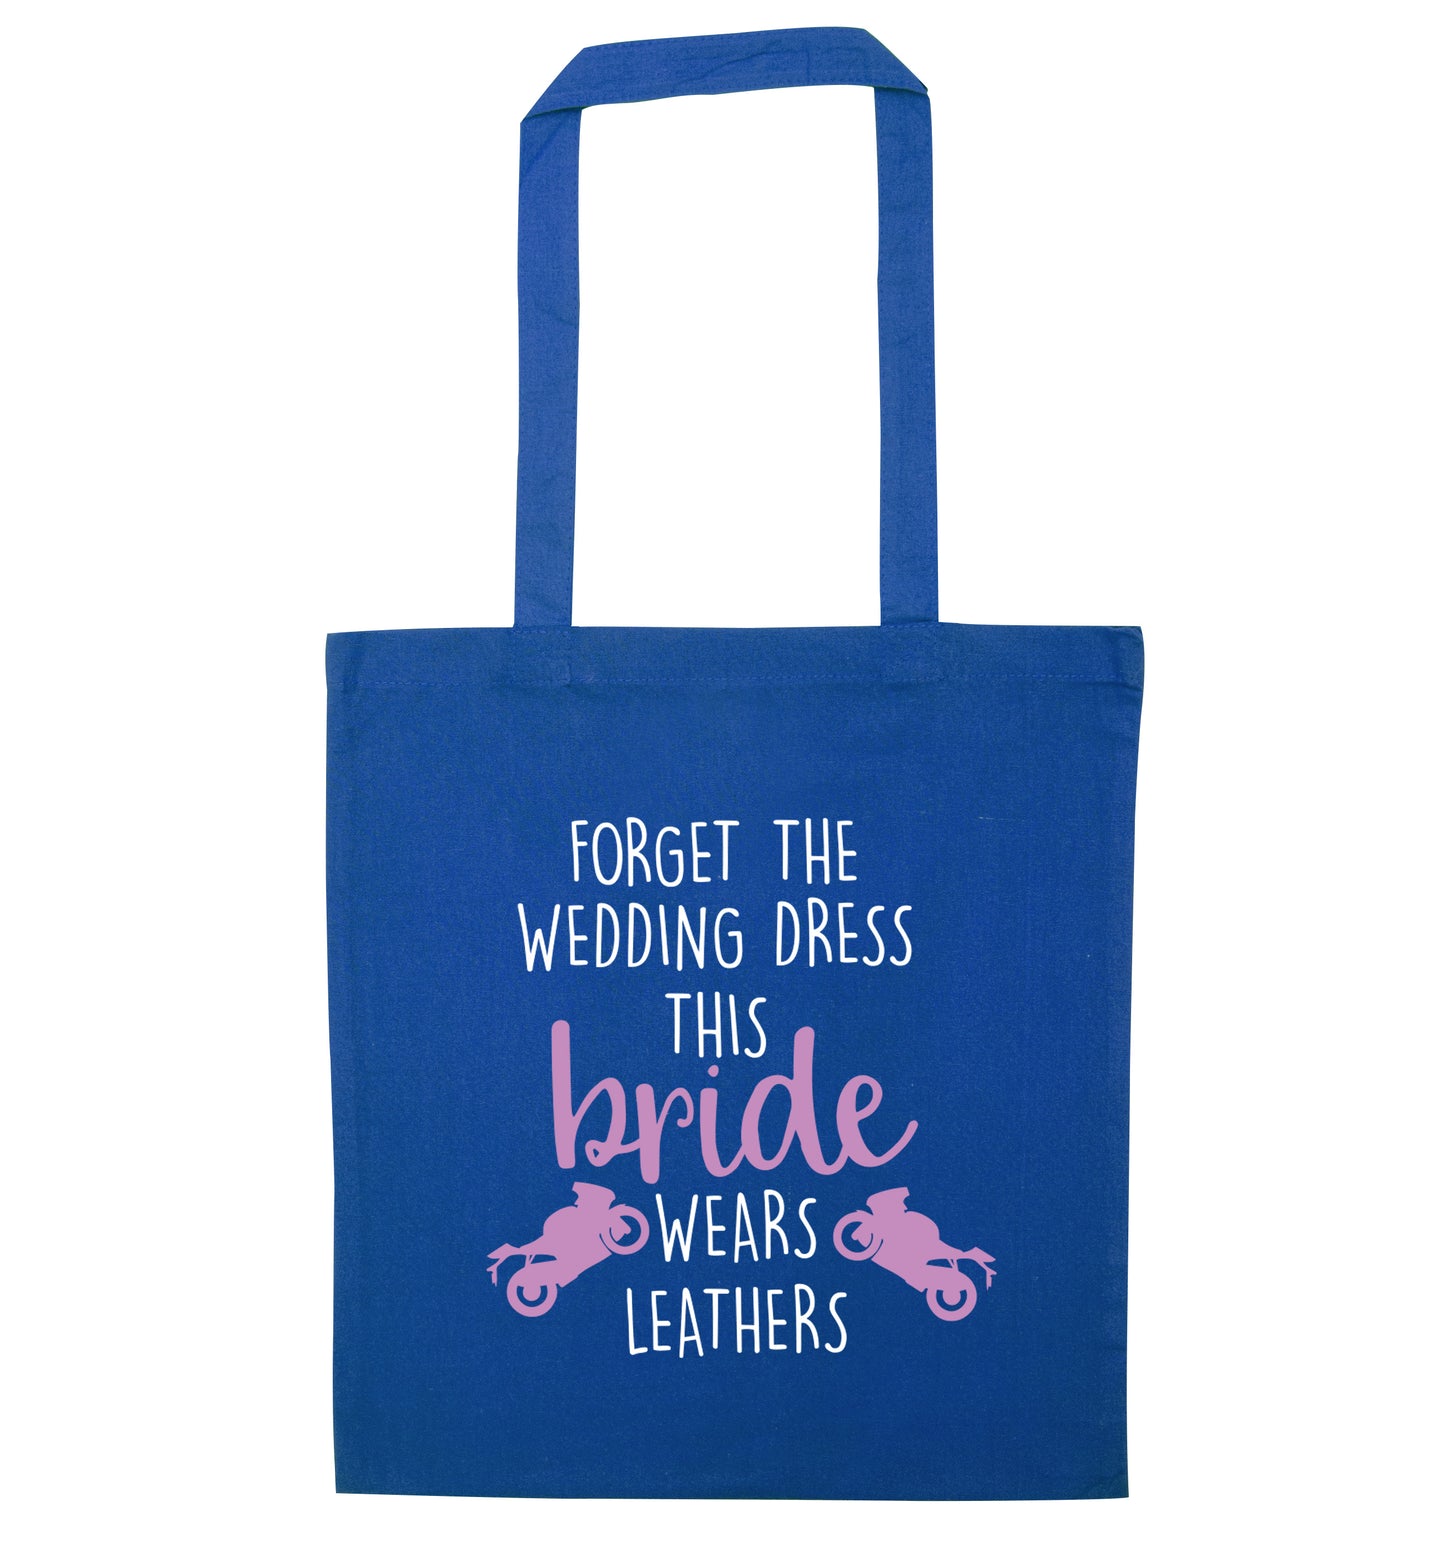 Forget the wedding dress this bride wears leathers blue tote bag